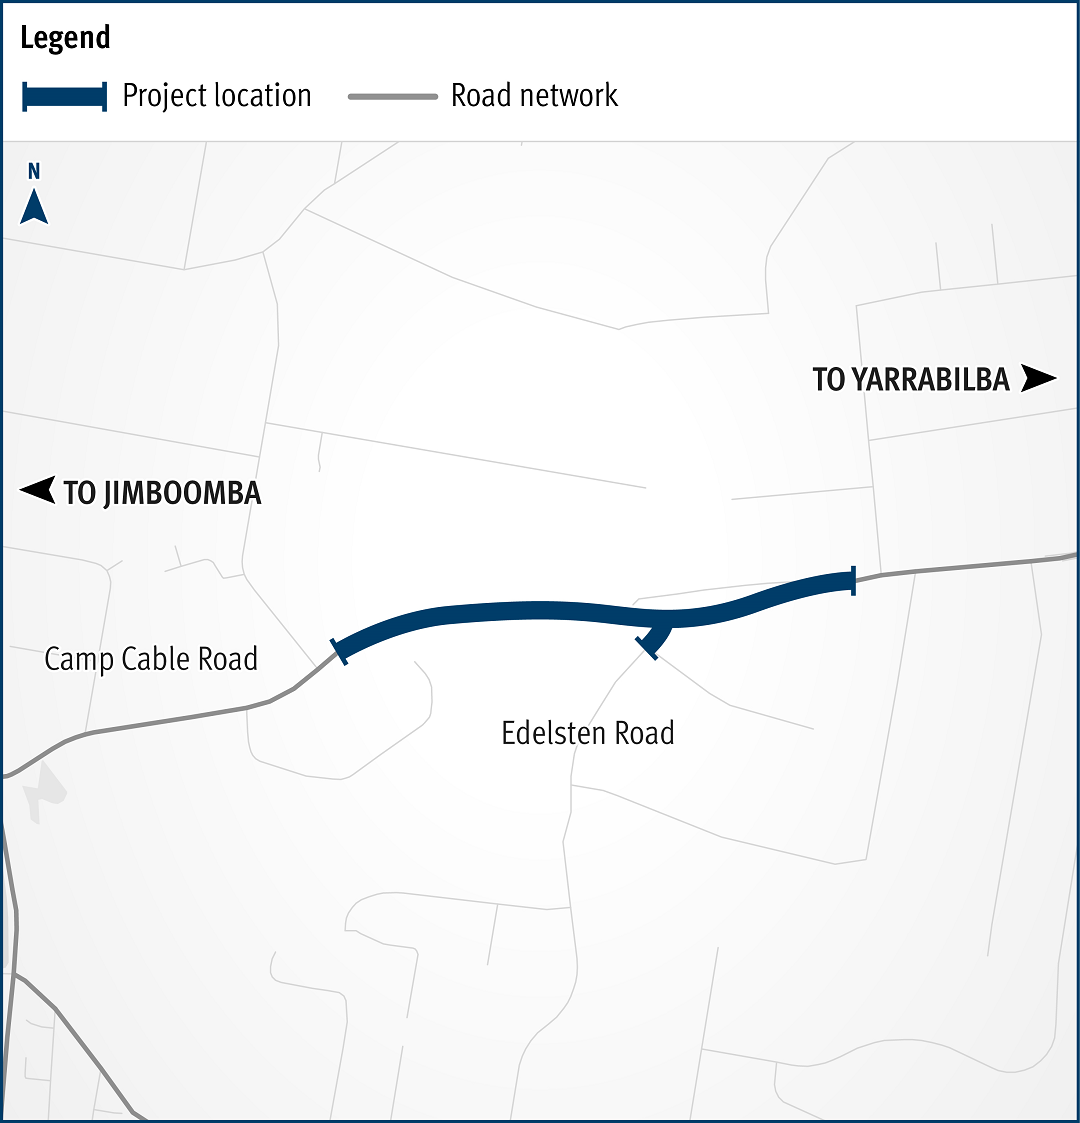 Map showing safety improvement works located at the intersection of Camp Cable Road and Edelsten Road in Jimboomba. The northern side of Camp Cable Road will be widened to allow for a dedicated right turn lane into Edlesten Road, so motorists can safely wait before turning, and through-traffic can continue ahead towards Yarrabilba. Camp Cable Road will have new formalised bus stops on both sides of the road along with an extra 2 metres of shoulder width for bicycle riders.  The existing left turn lane from Camp Cable Road onto Edelsten Road will be relinemarked as a shared left turn lane to improve traffic flow. New Stop signs will be installed on Edelsten Road at the intersection replacing the existing Give Way signs.